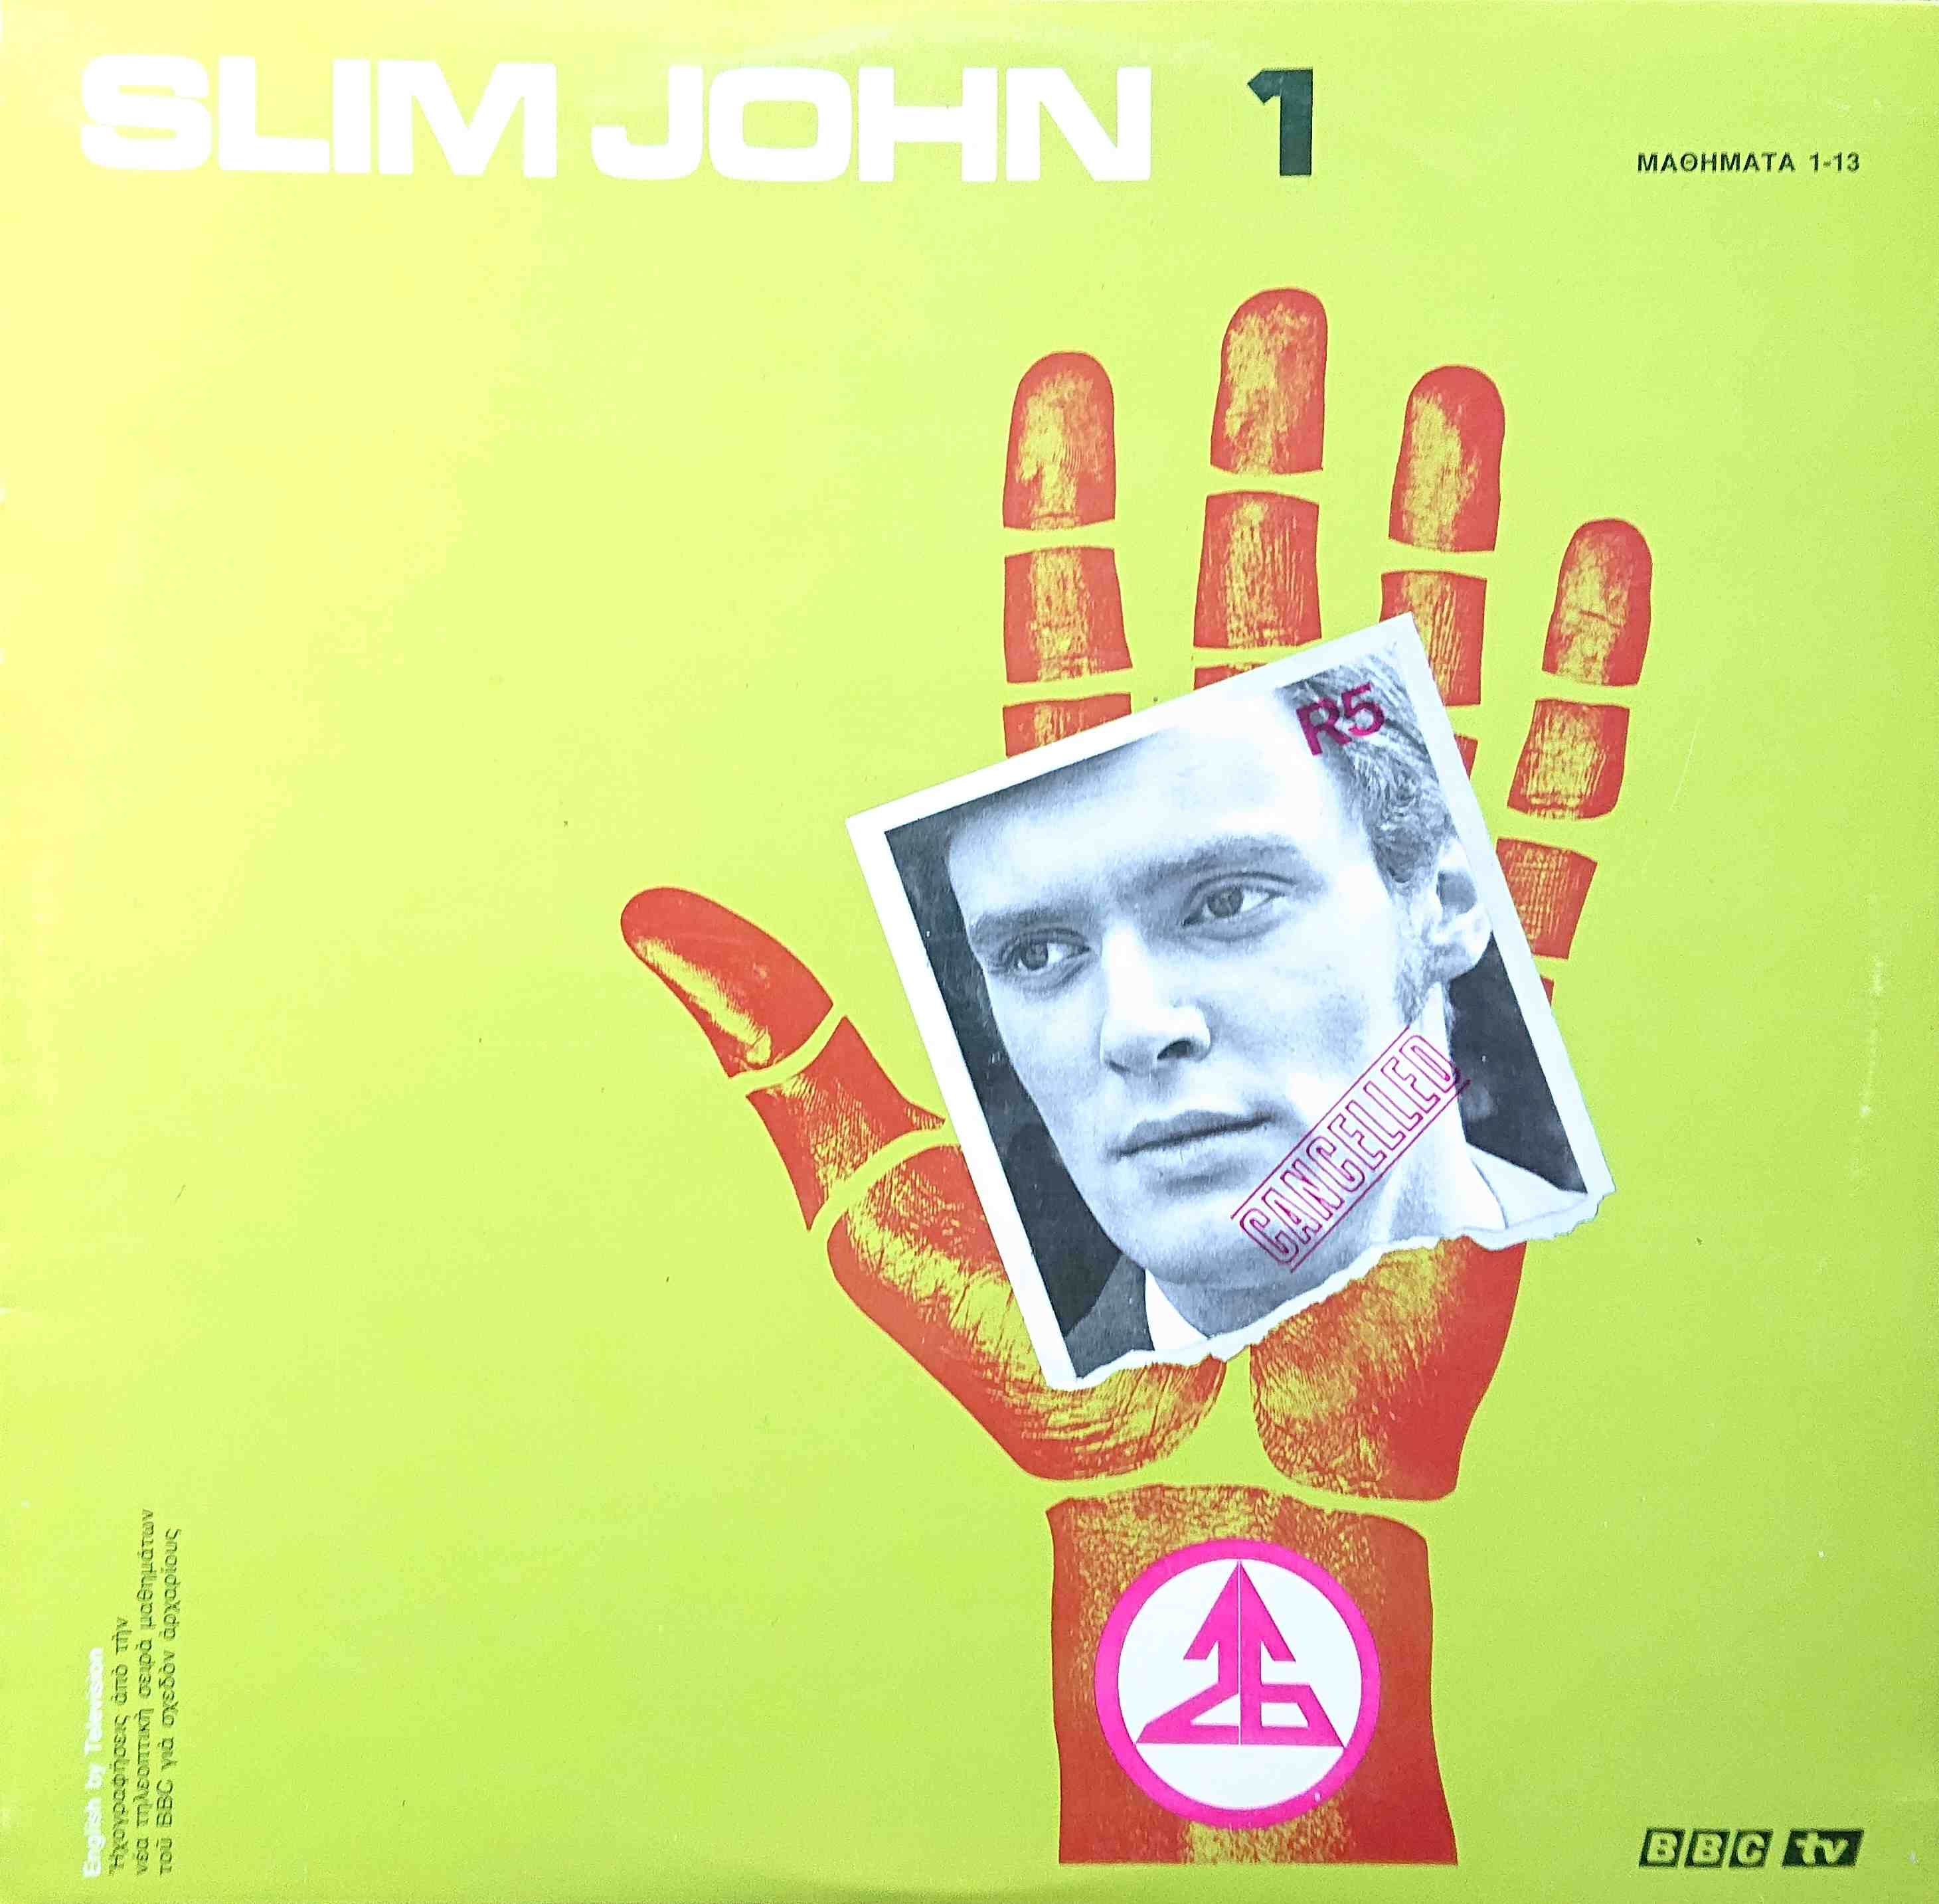 Picture of Slim John 1 by artist Unknown from the BBC albums - Records and Tapes library